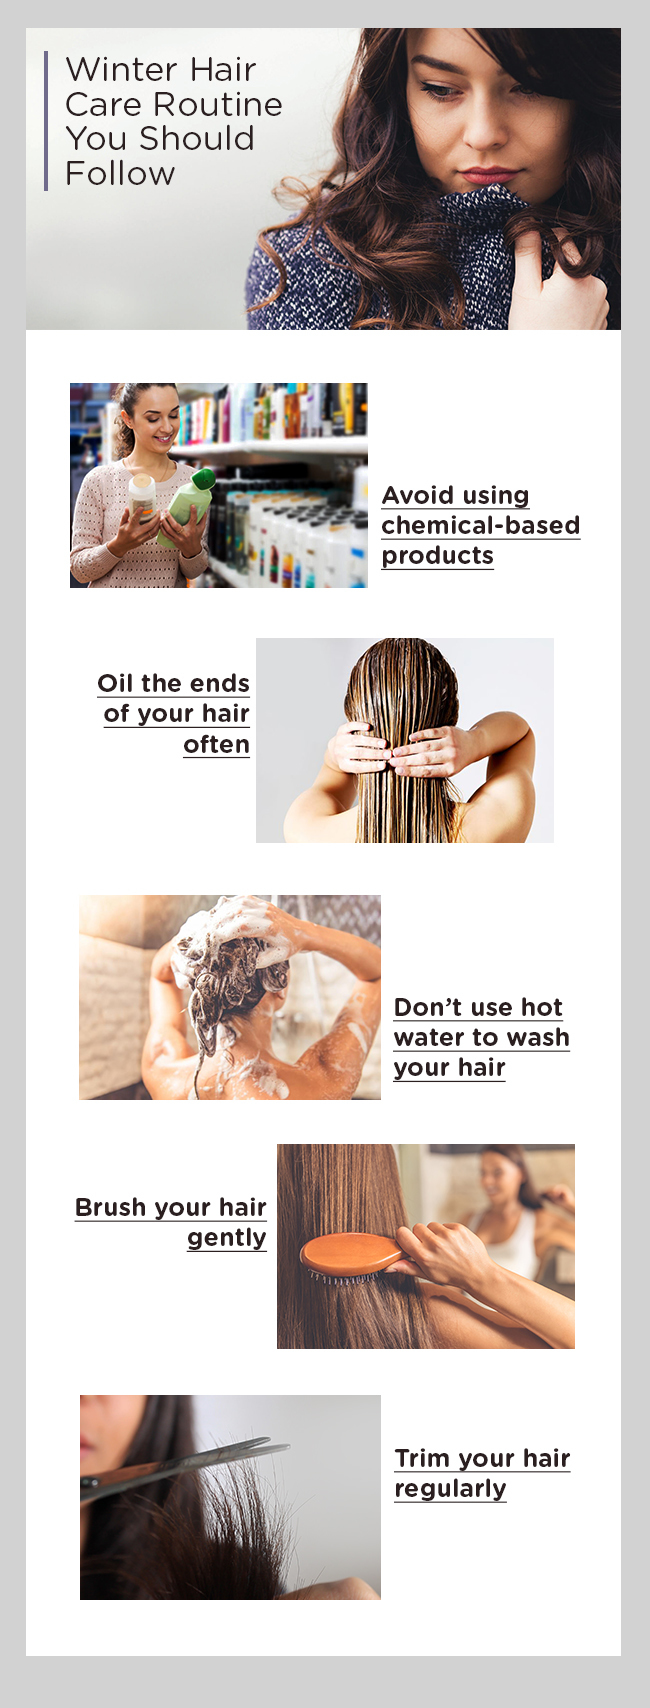 Winter_Hair_Care_Routine_You_Should_Follow